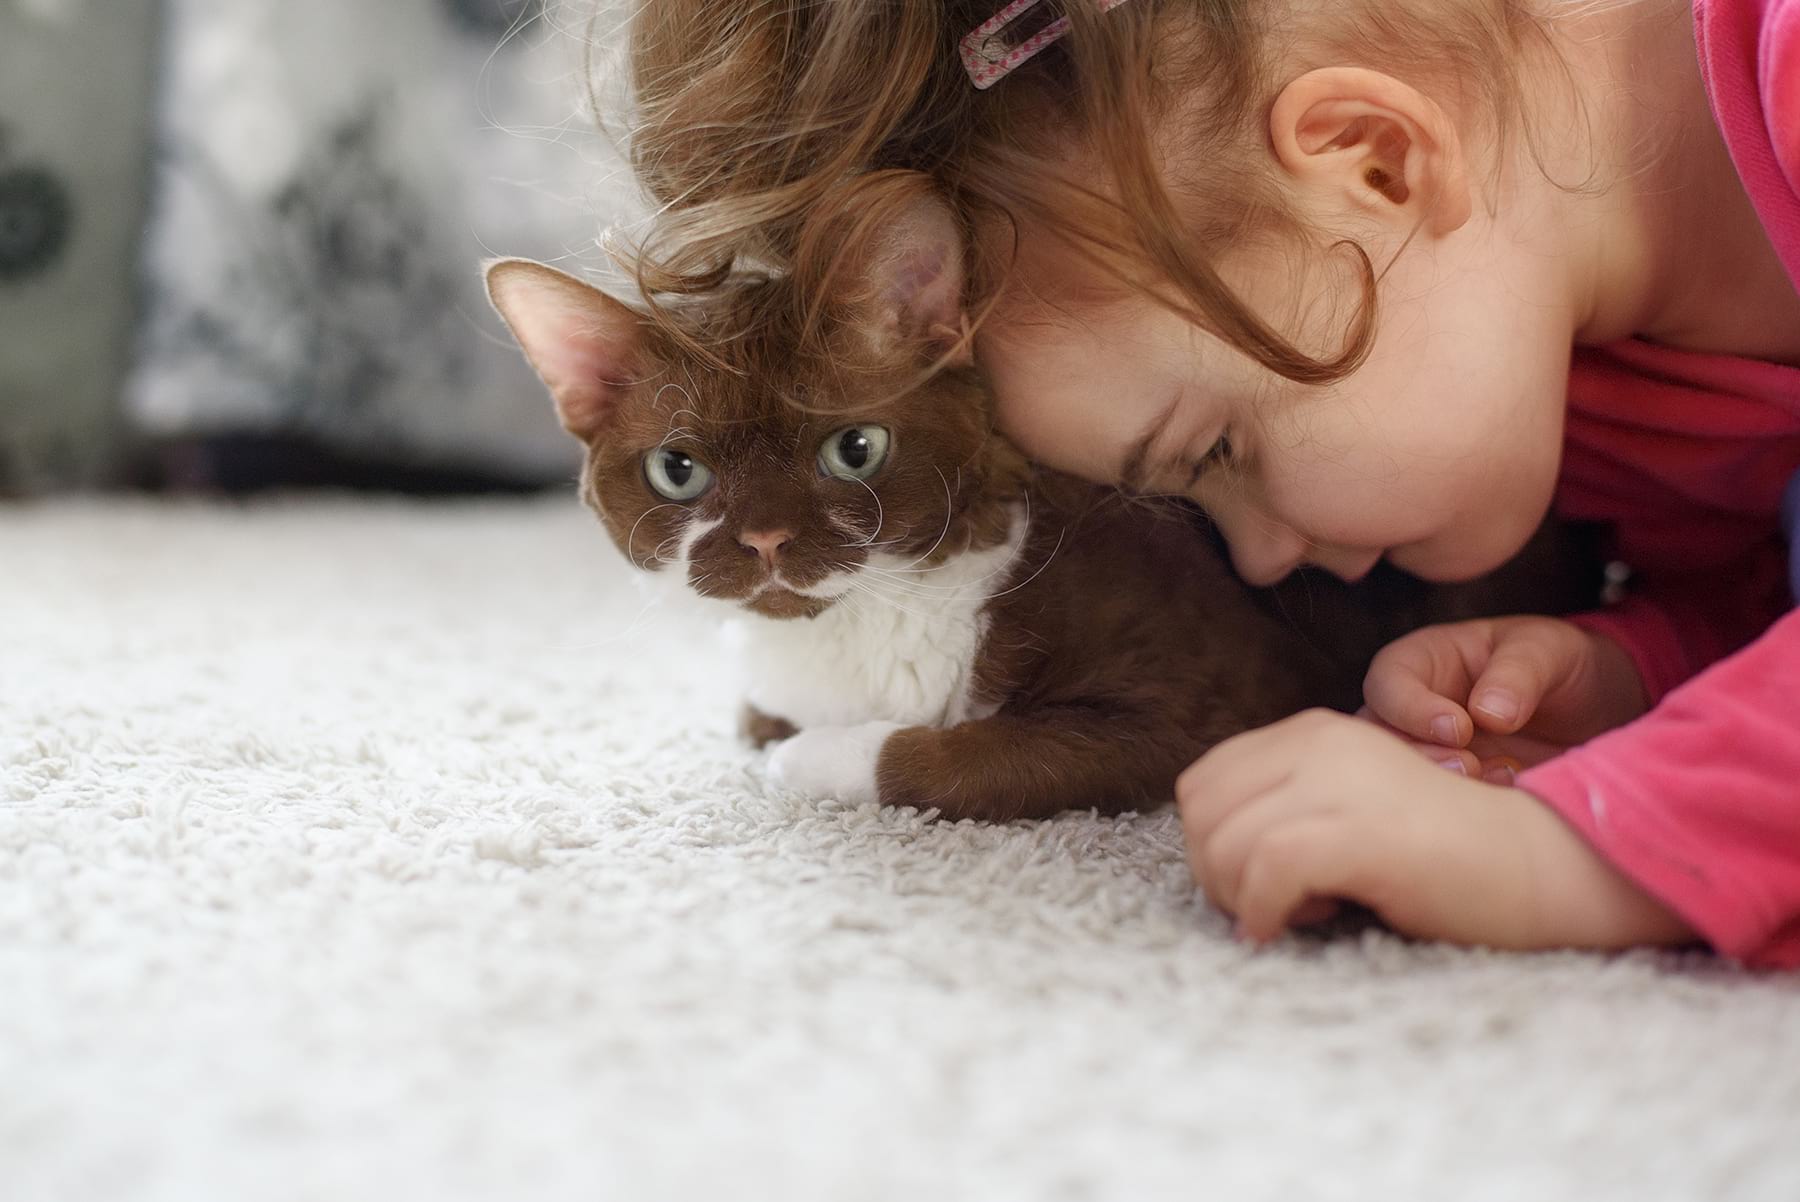 Autistic child with brown cat.